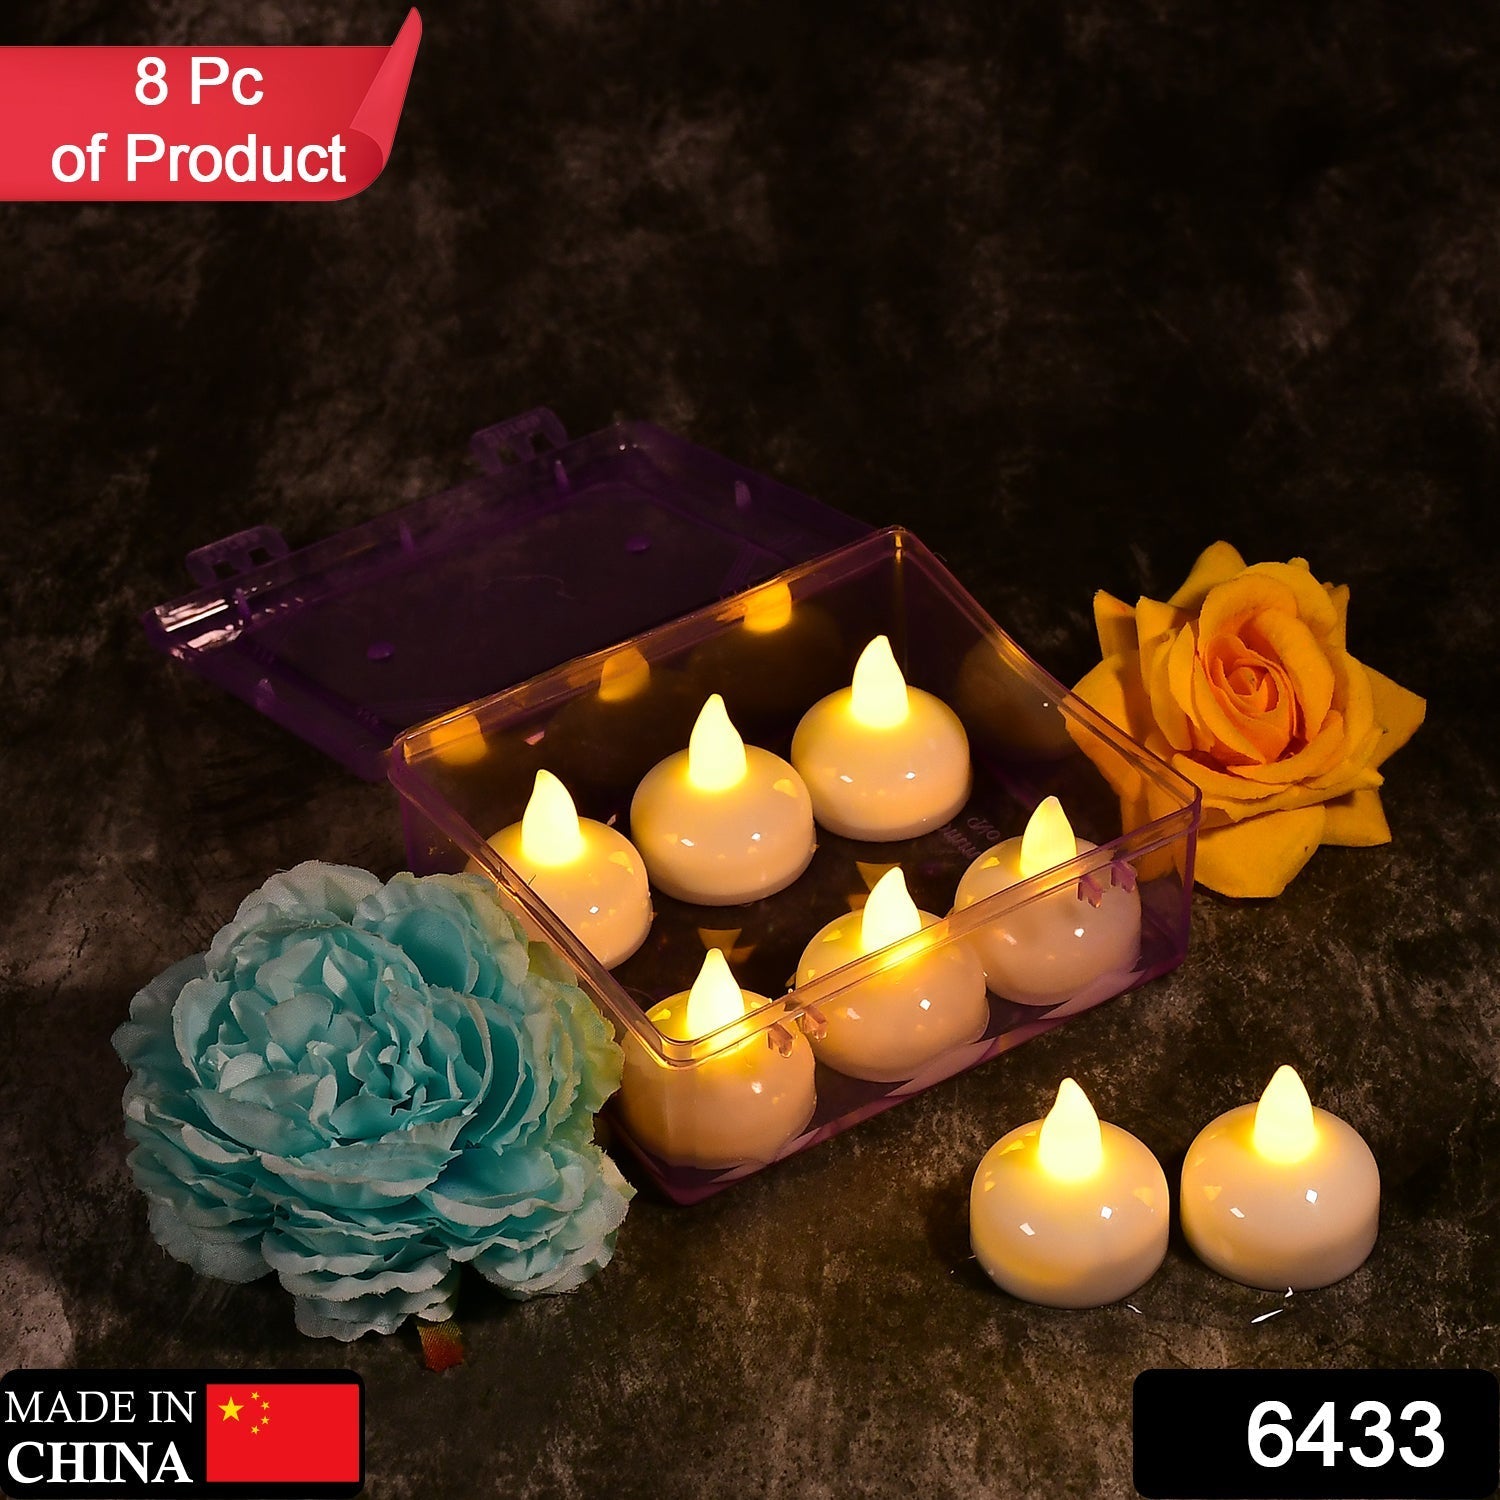 6433 Set of 8Pcs With transparent box. Flameless Floating Candles Battery Operated Tea Lights Tealight Candle - Decorative, Wedding. 